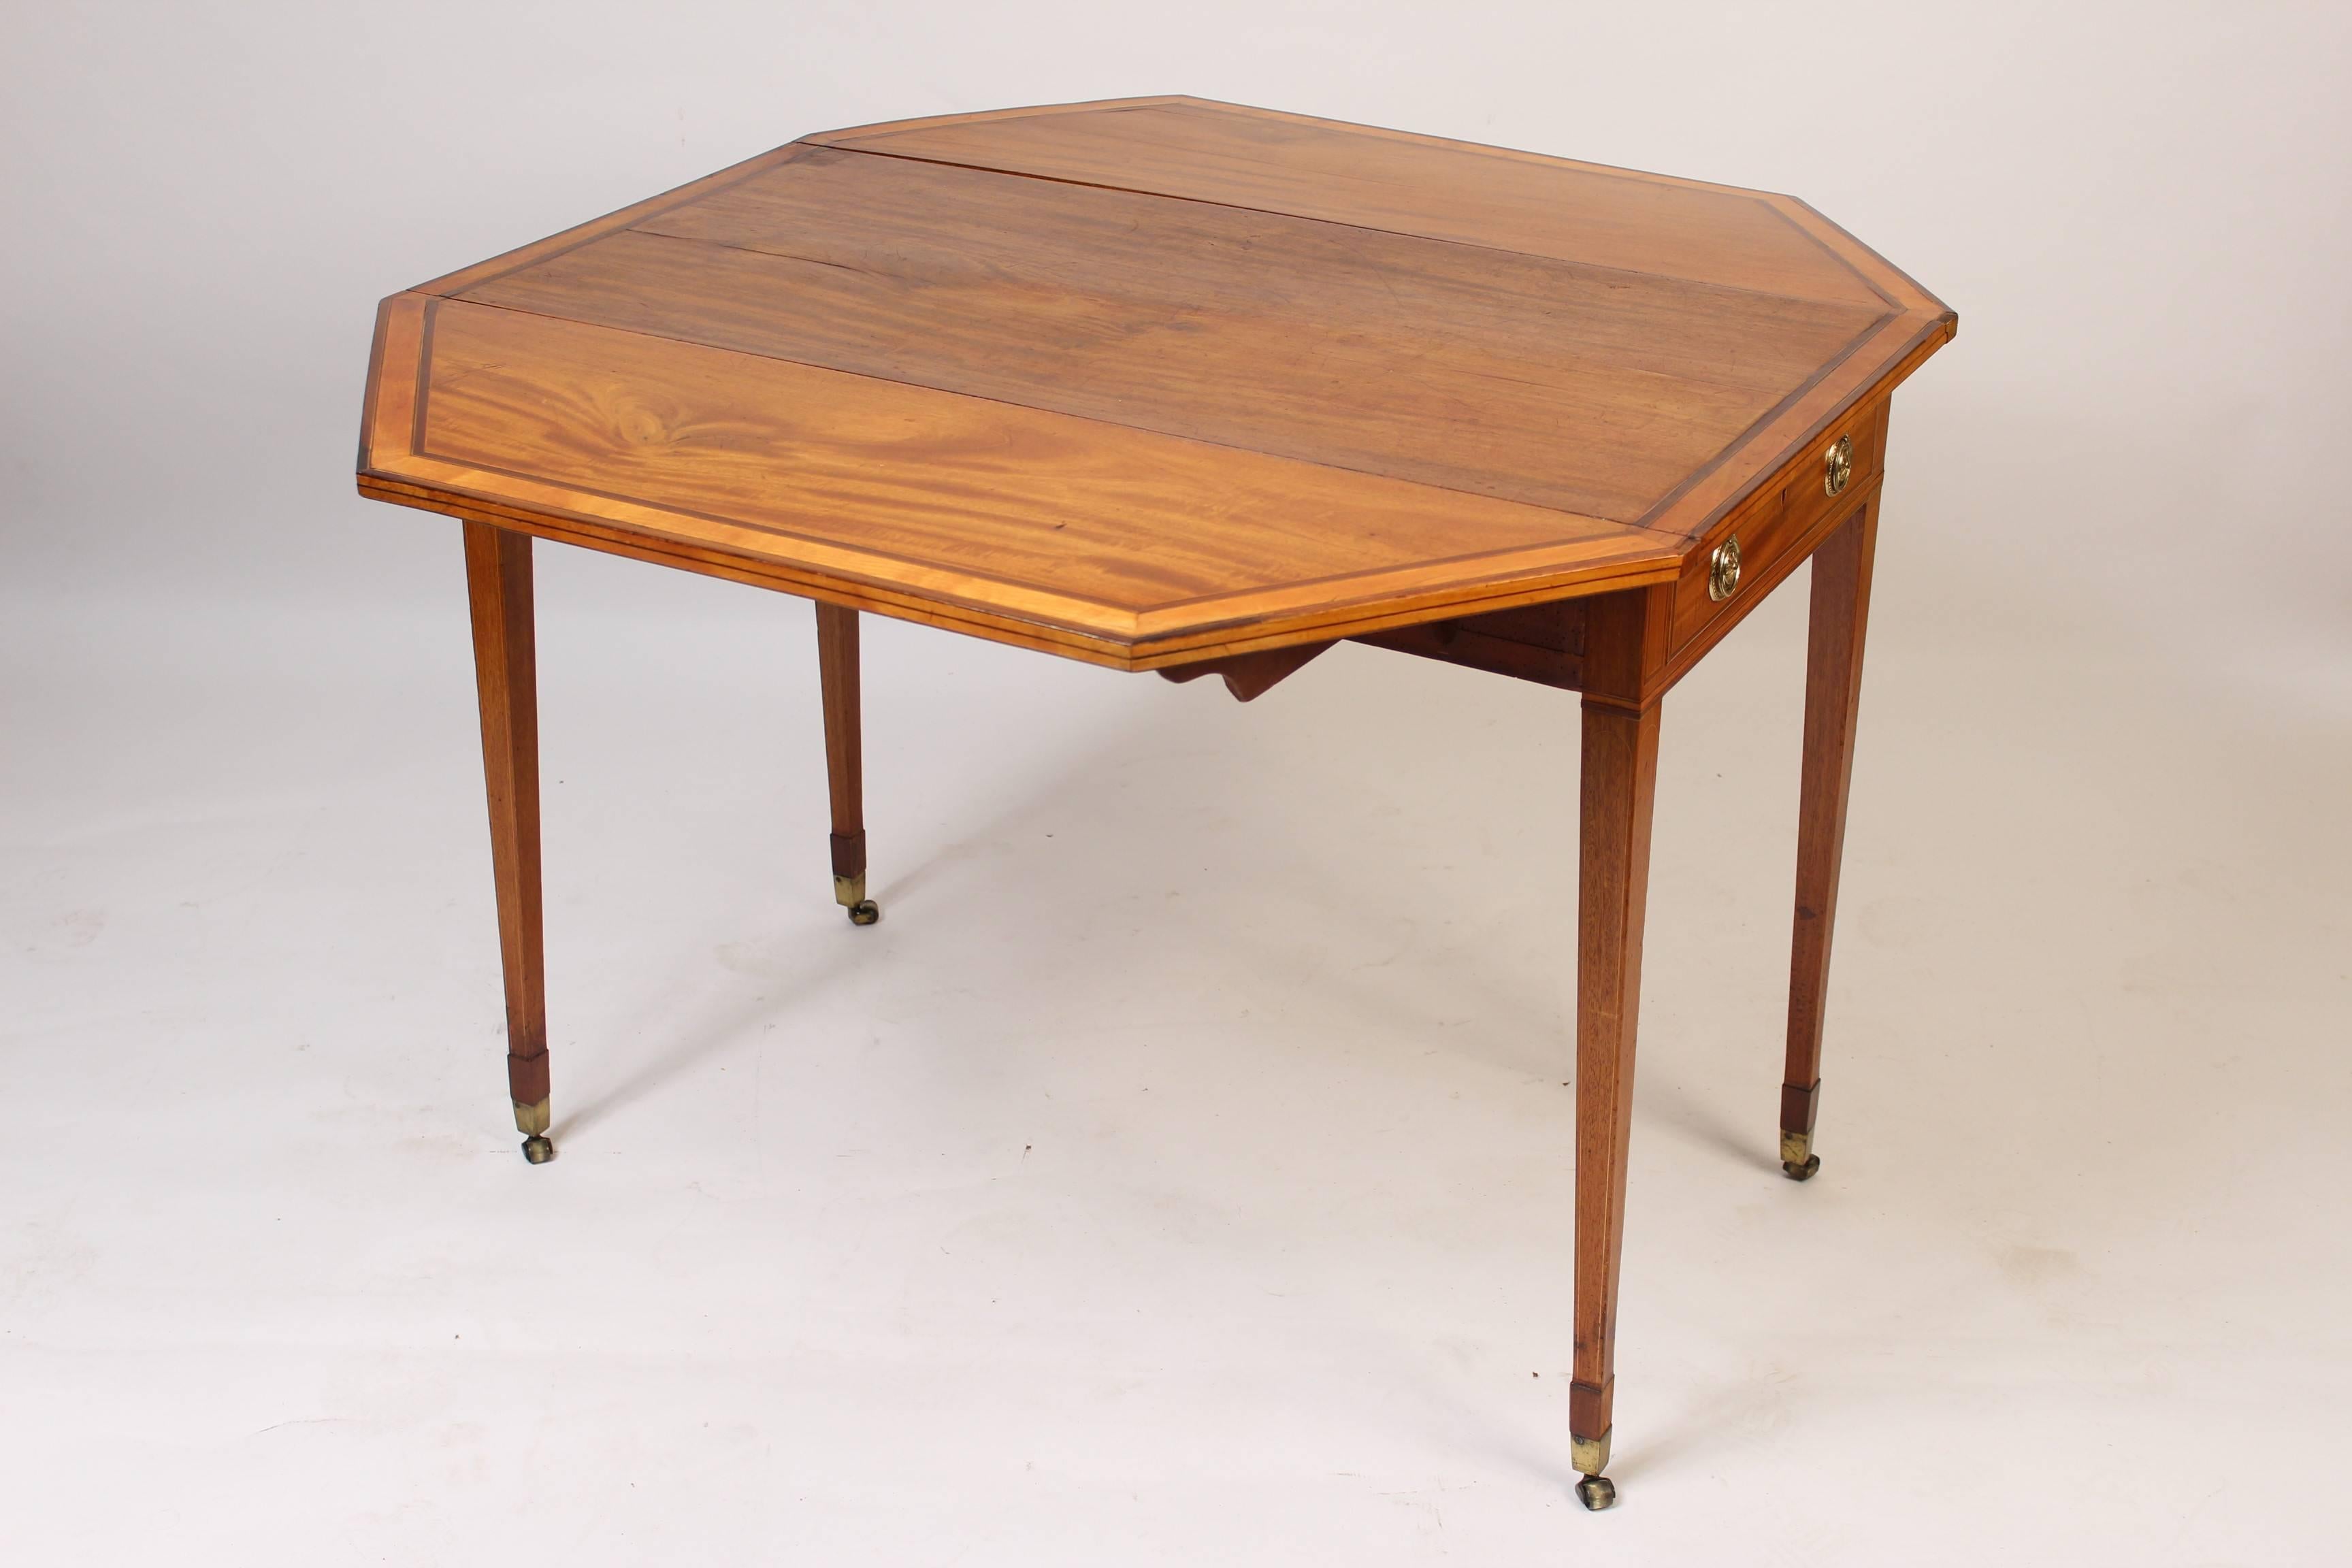 George III style satinwood and mahogany pembroke table, late 19th century.